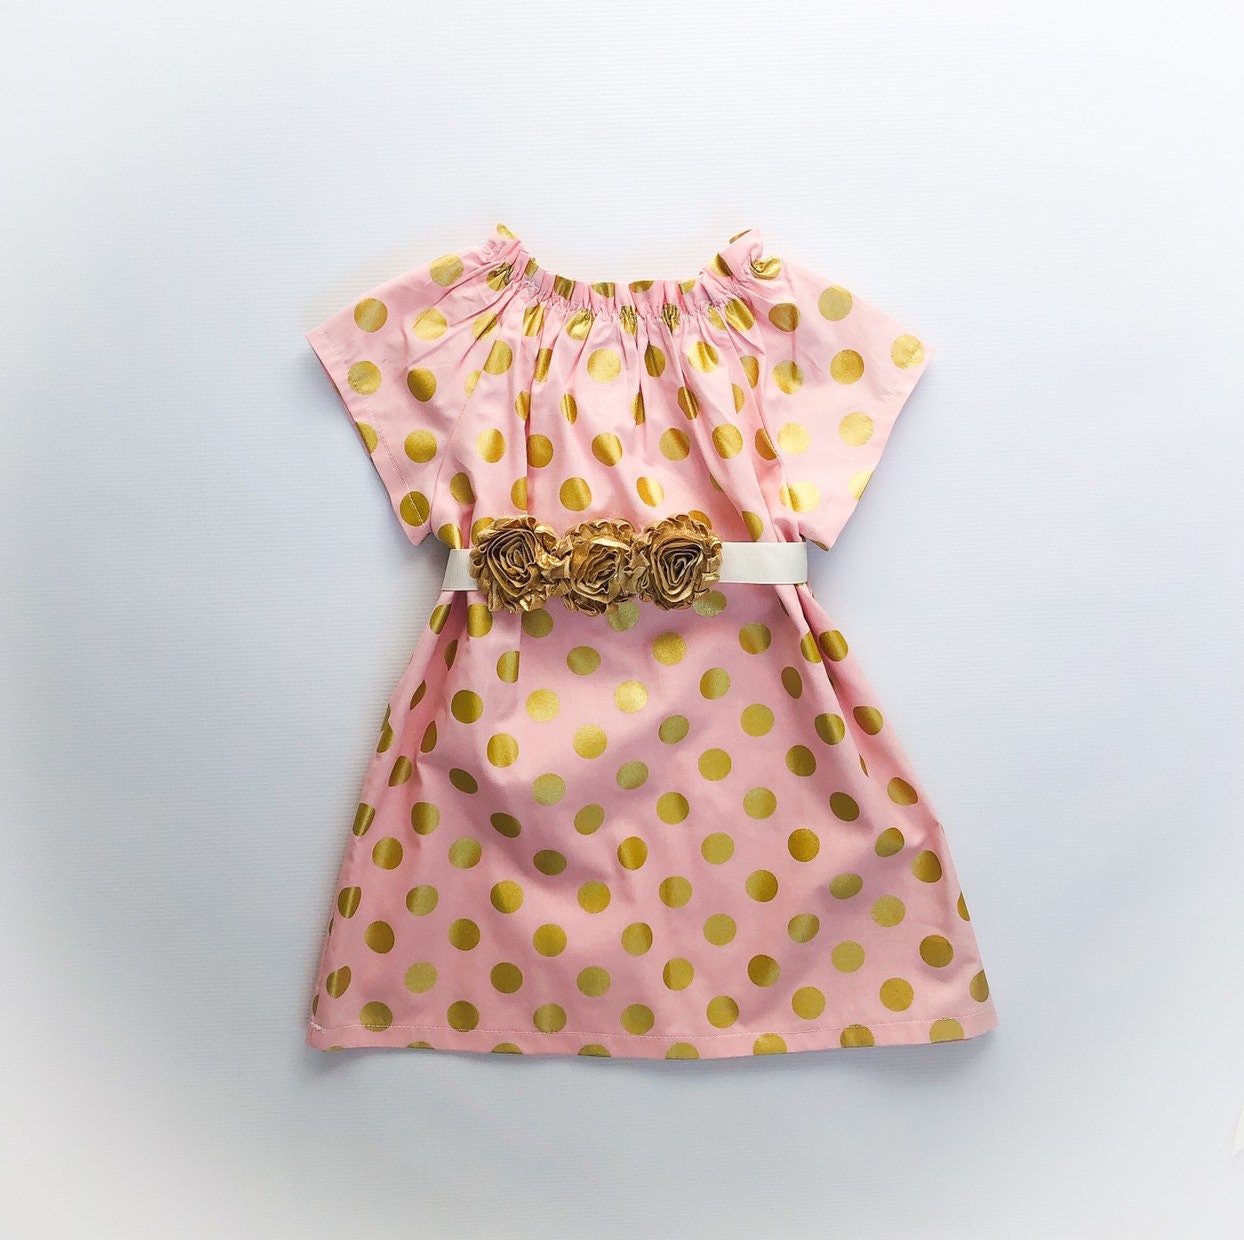 pink dress with gold polka dots